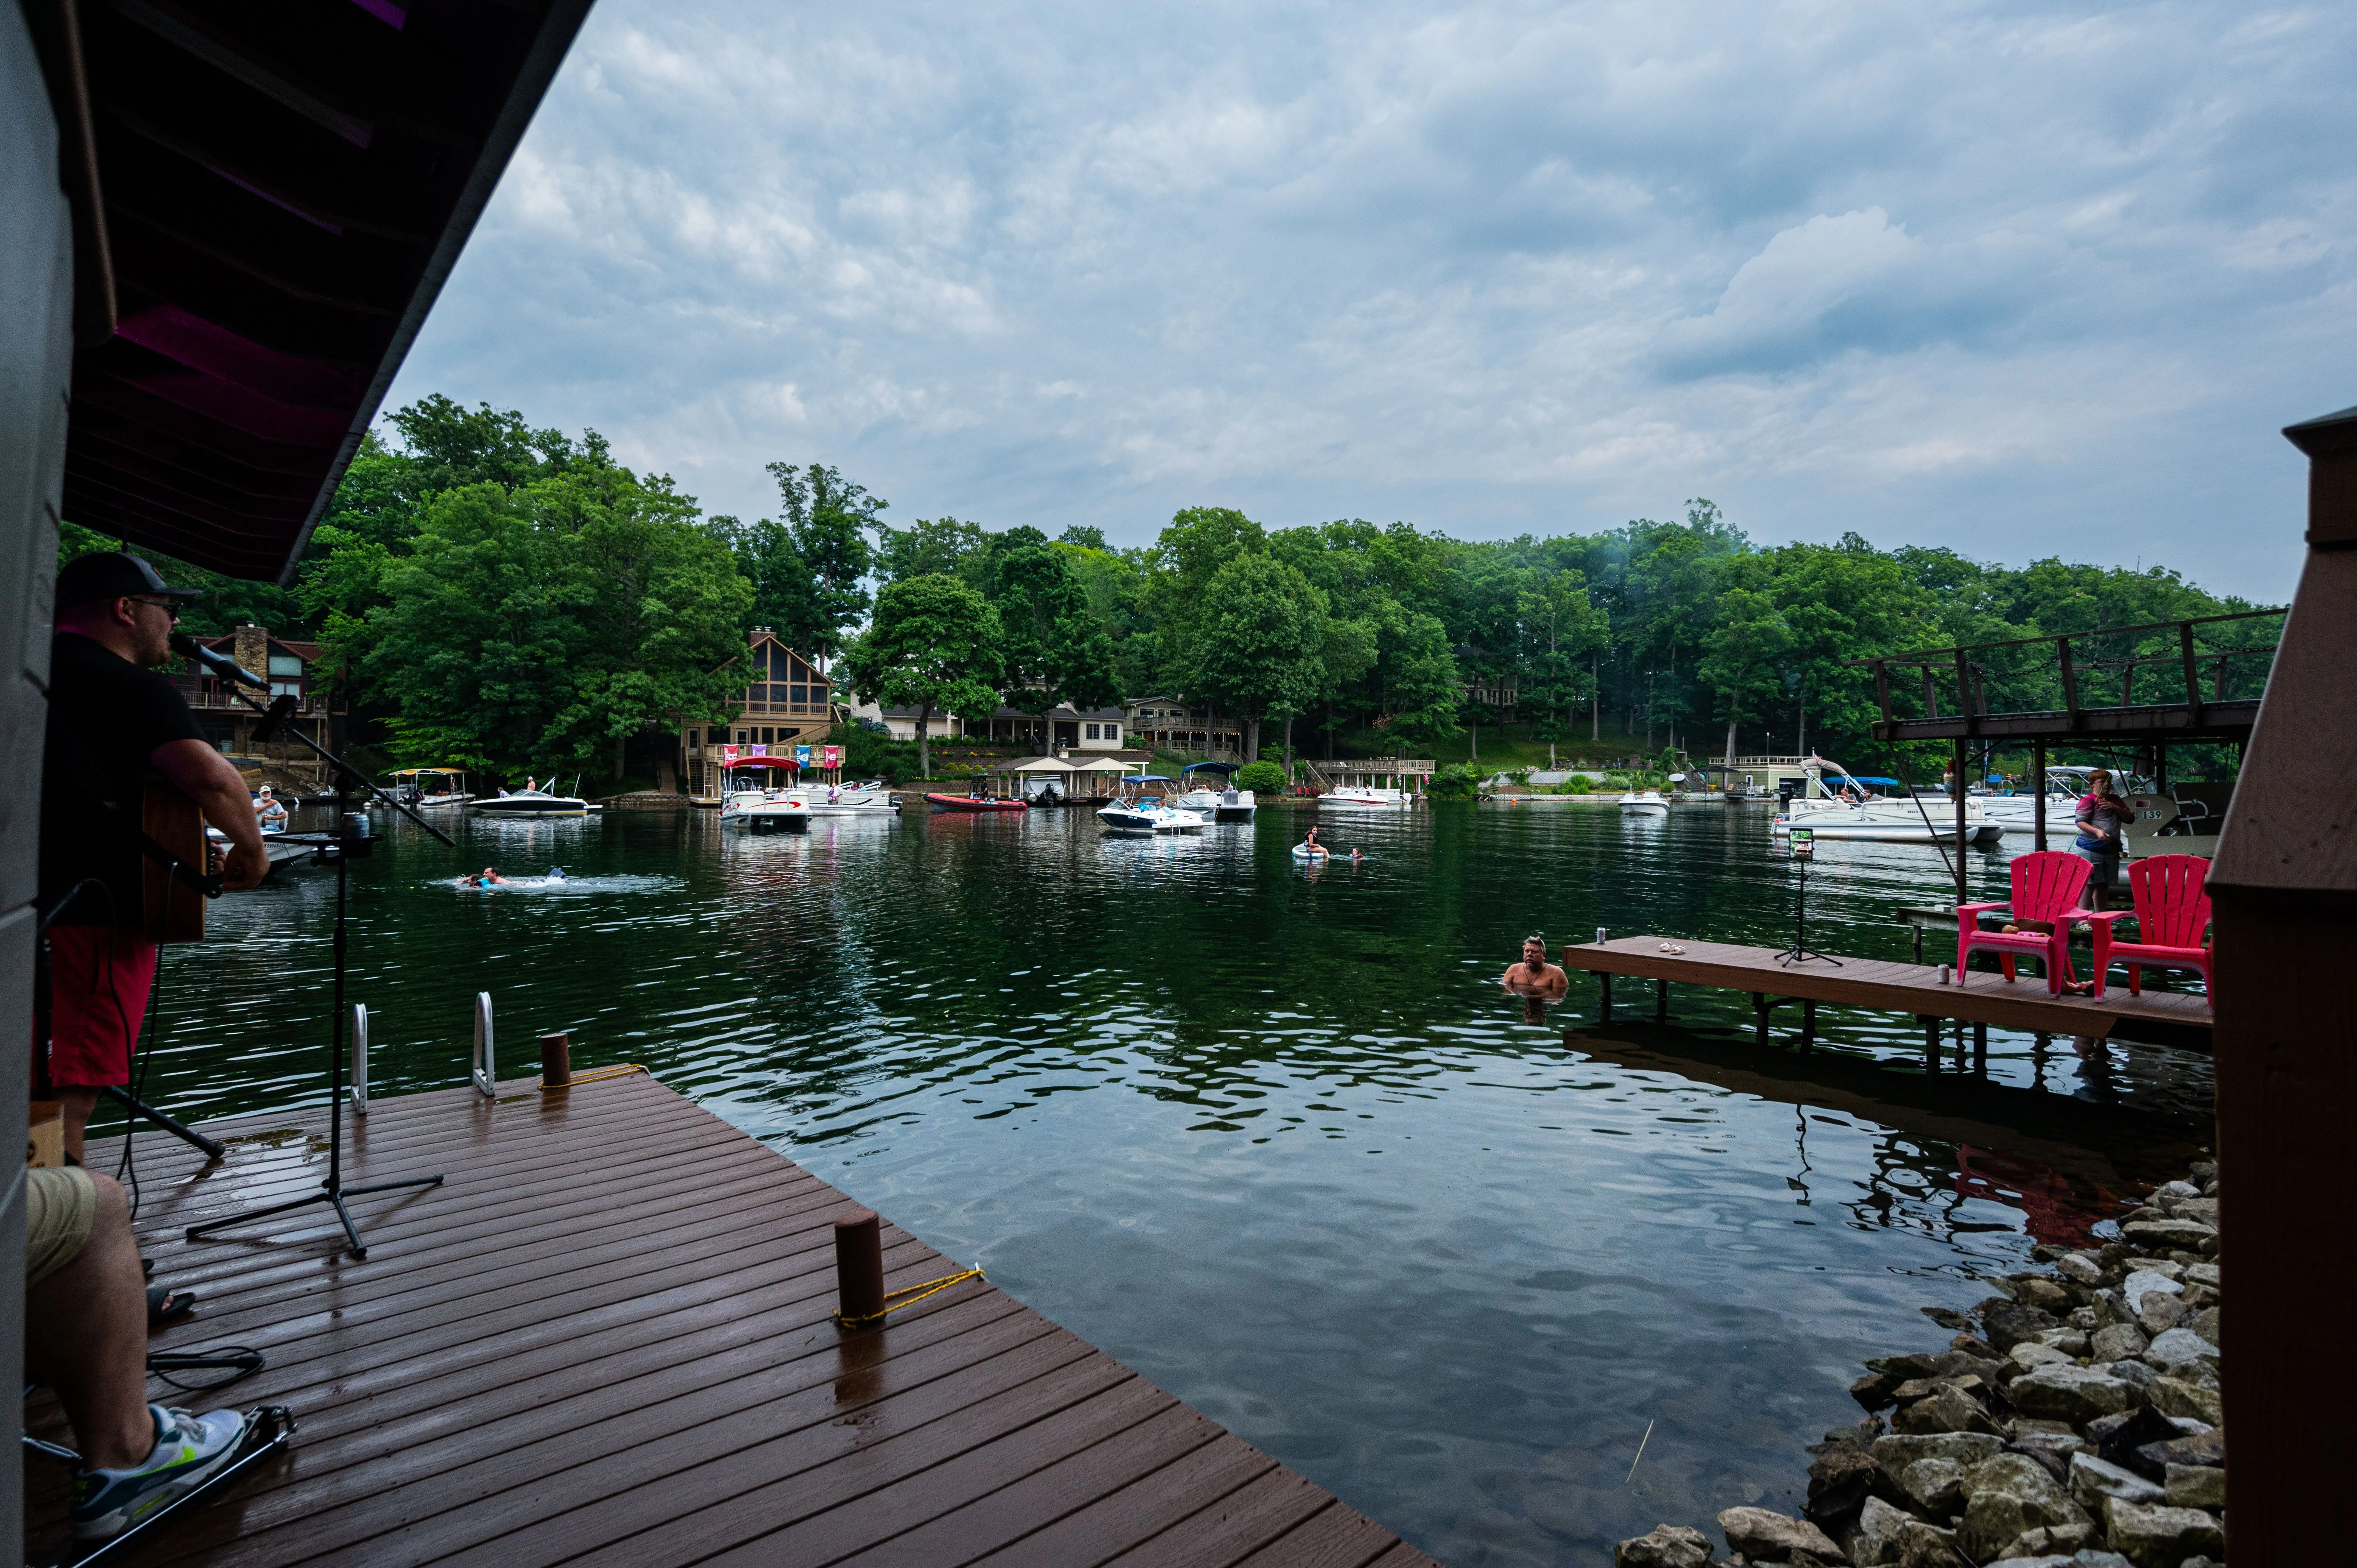 View from a lakeside dock with moored boats, outdoor seating, and overcast skies.